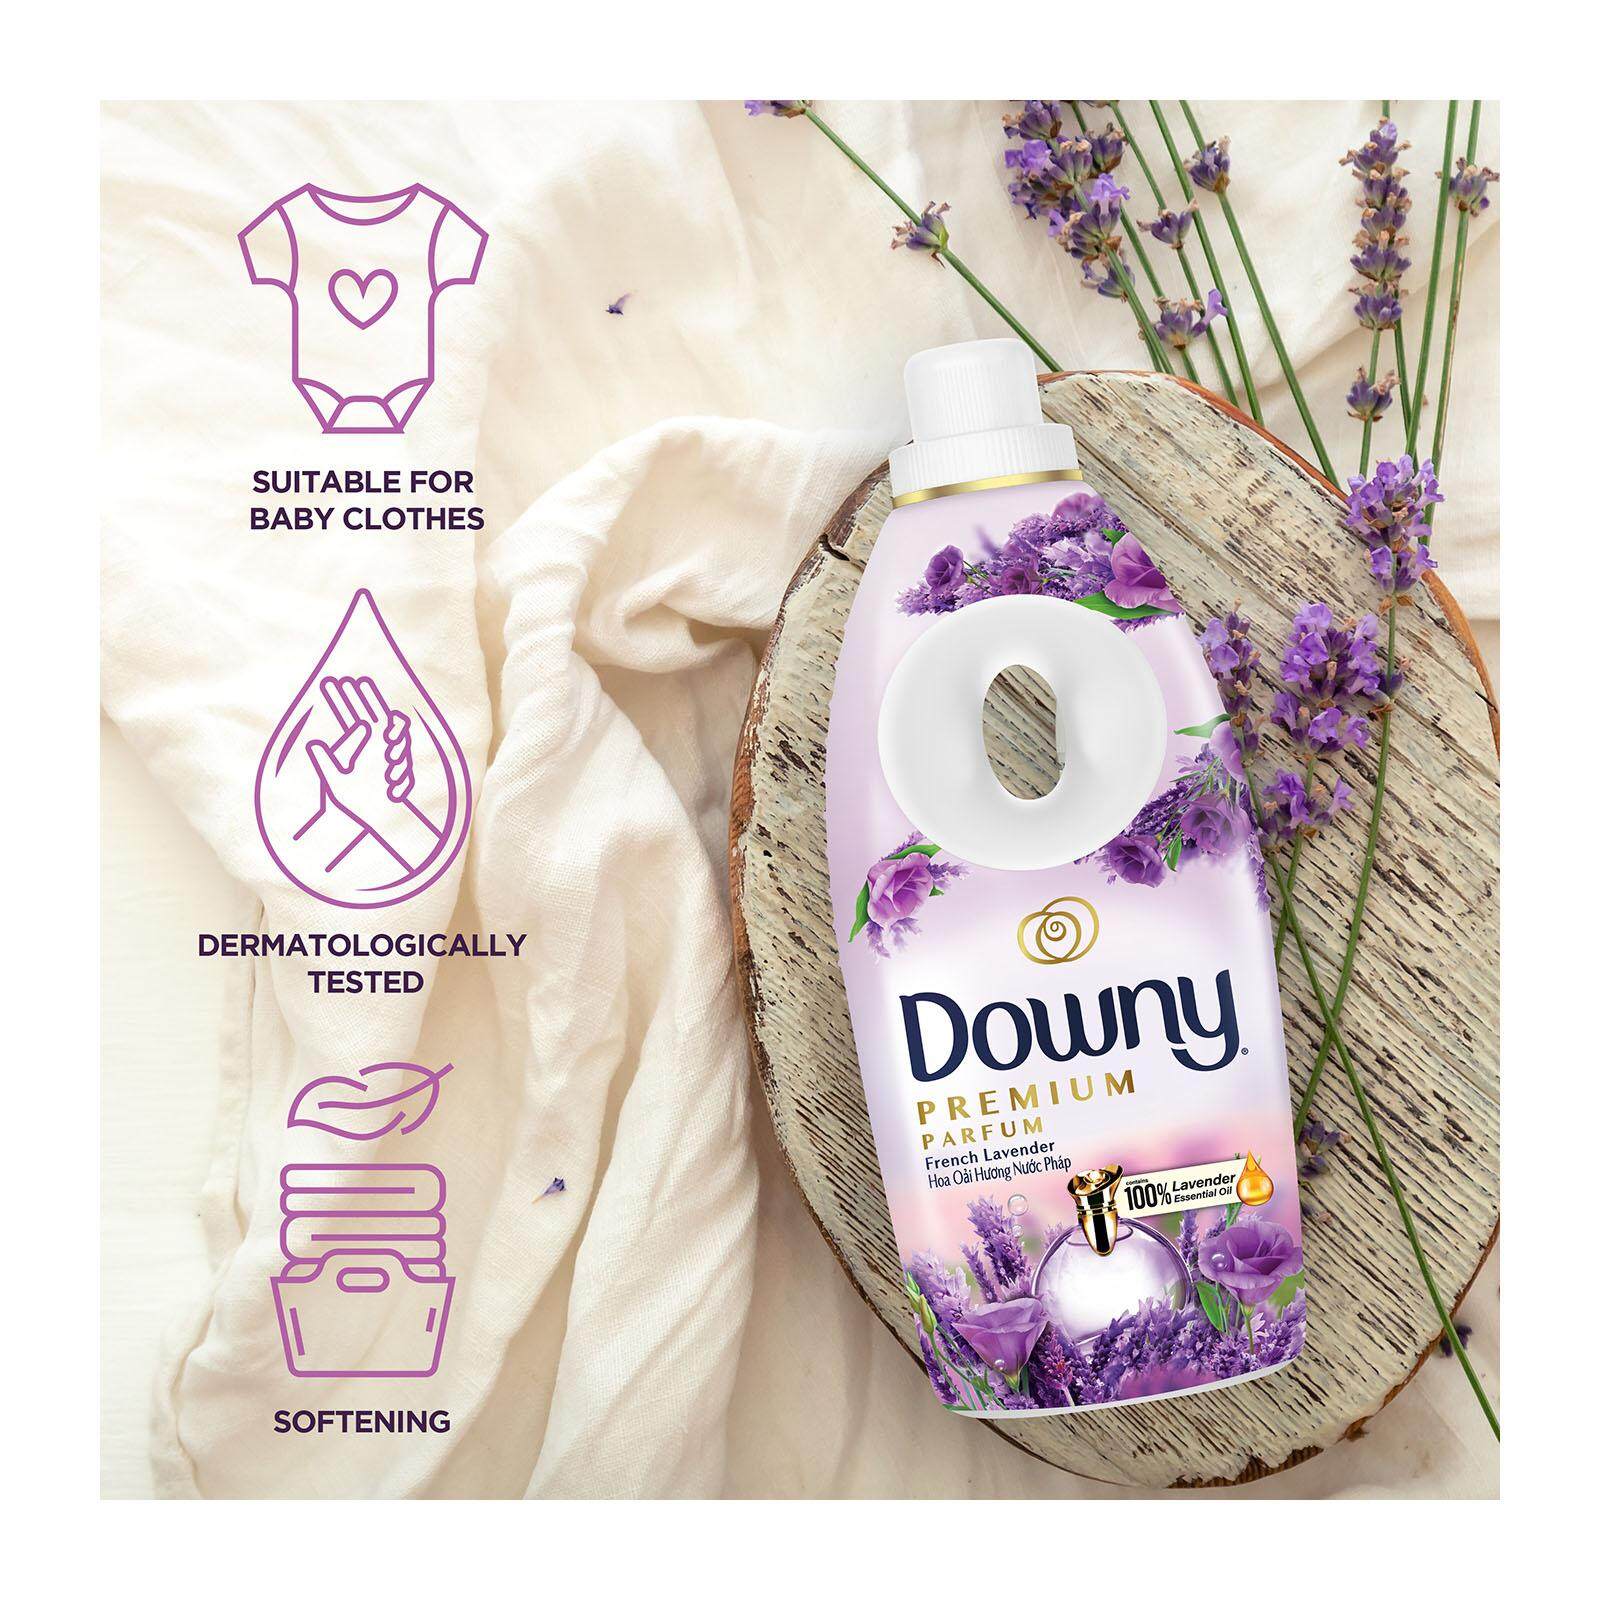 Downy Premium Parfum French Lavender Concentrate Fabric Conditioner 1350ml